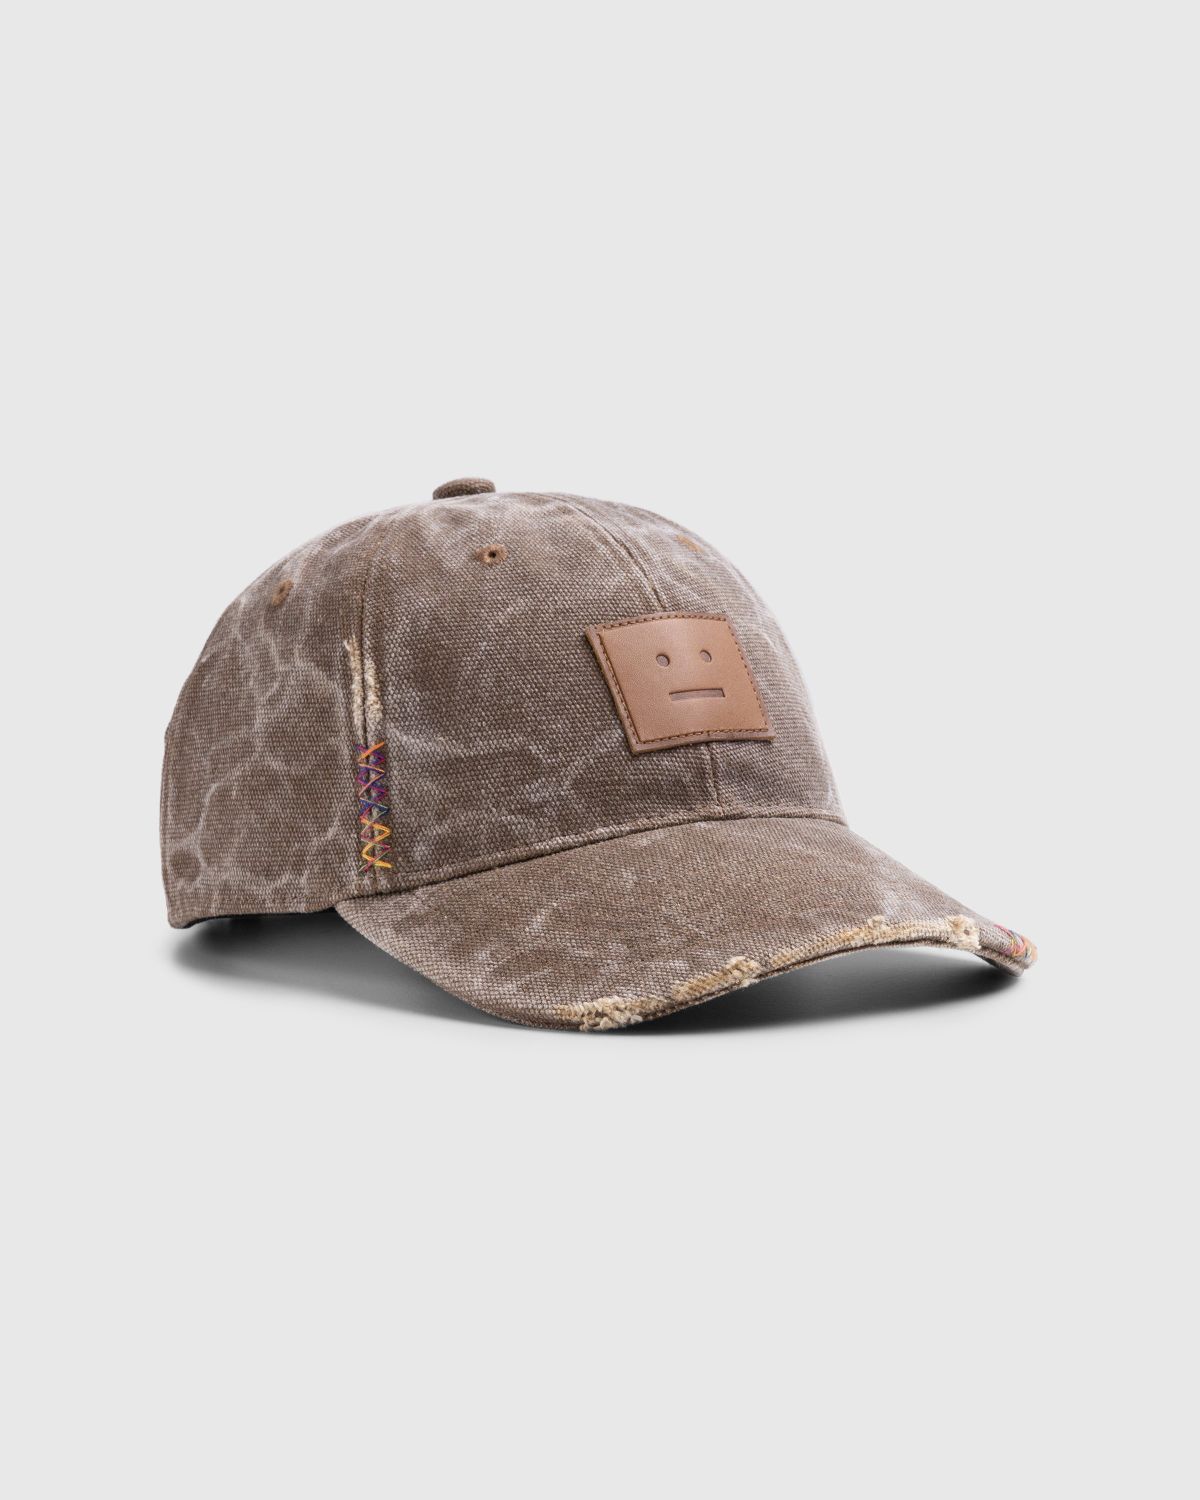 Acne Studios – Leather Face Patch Cap Toffee Brown | Highsnobiety Shop